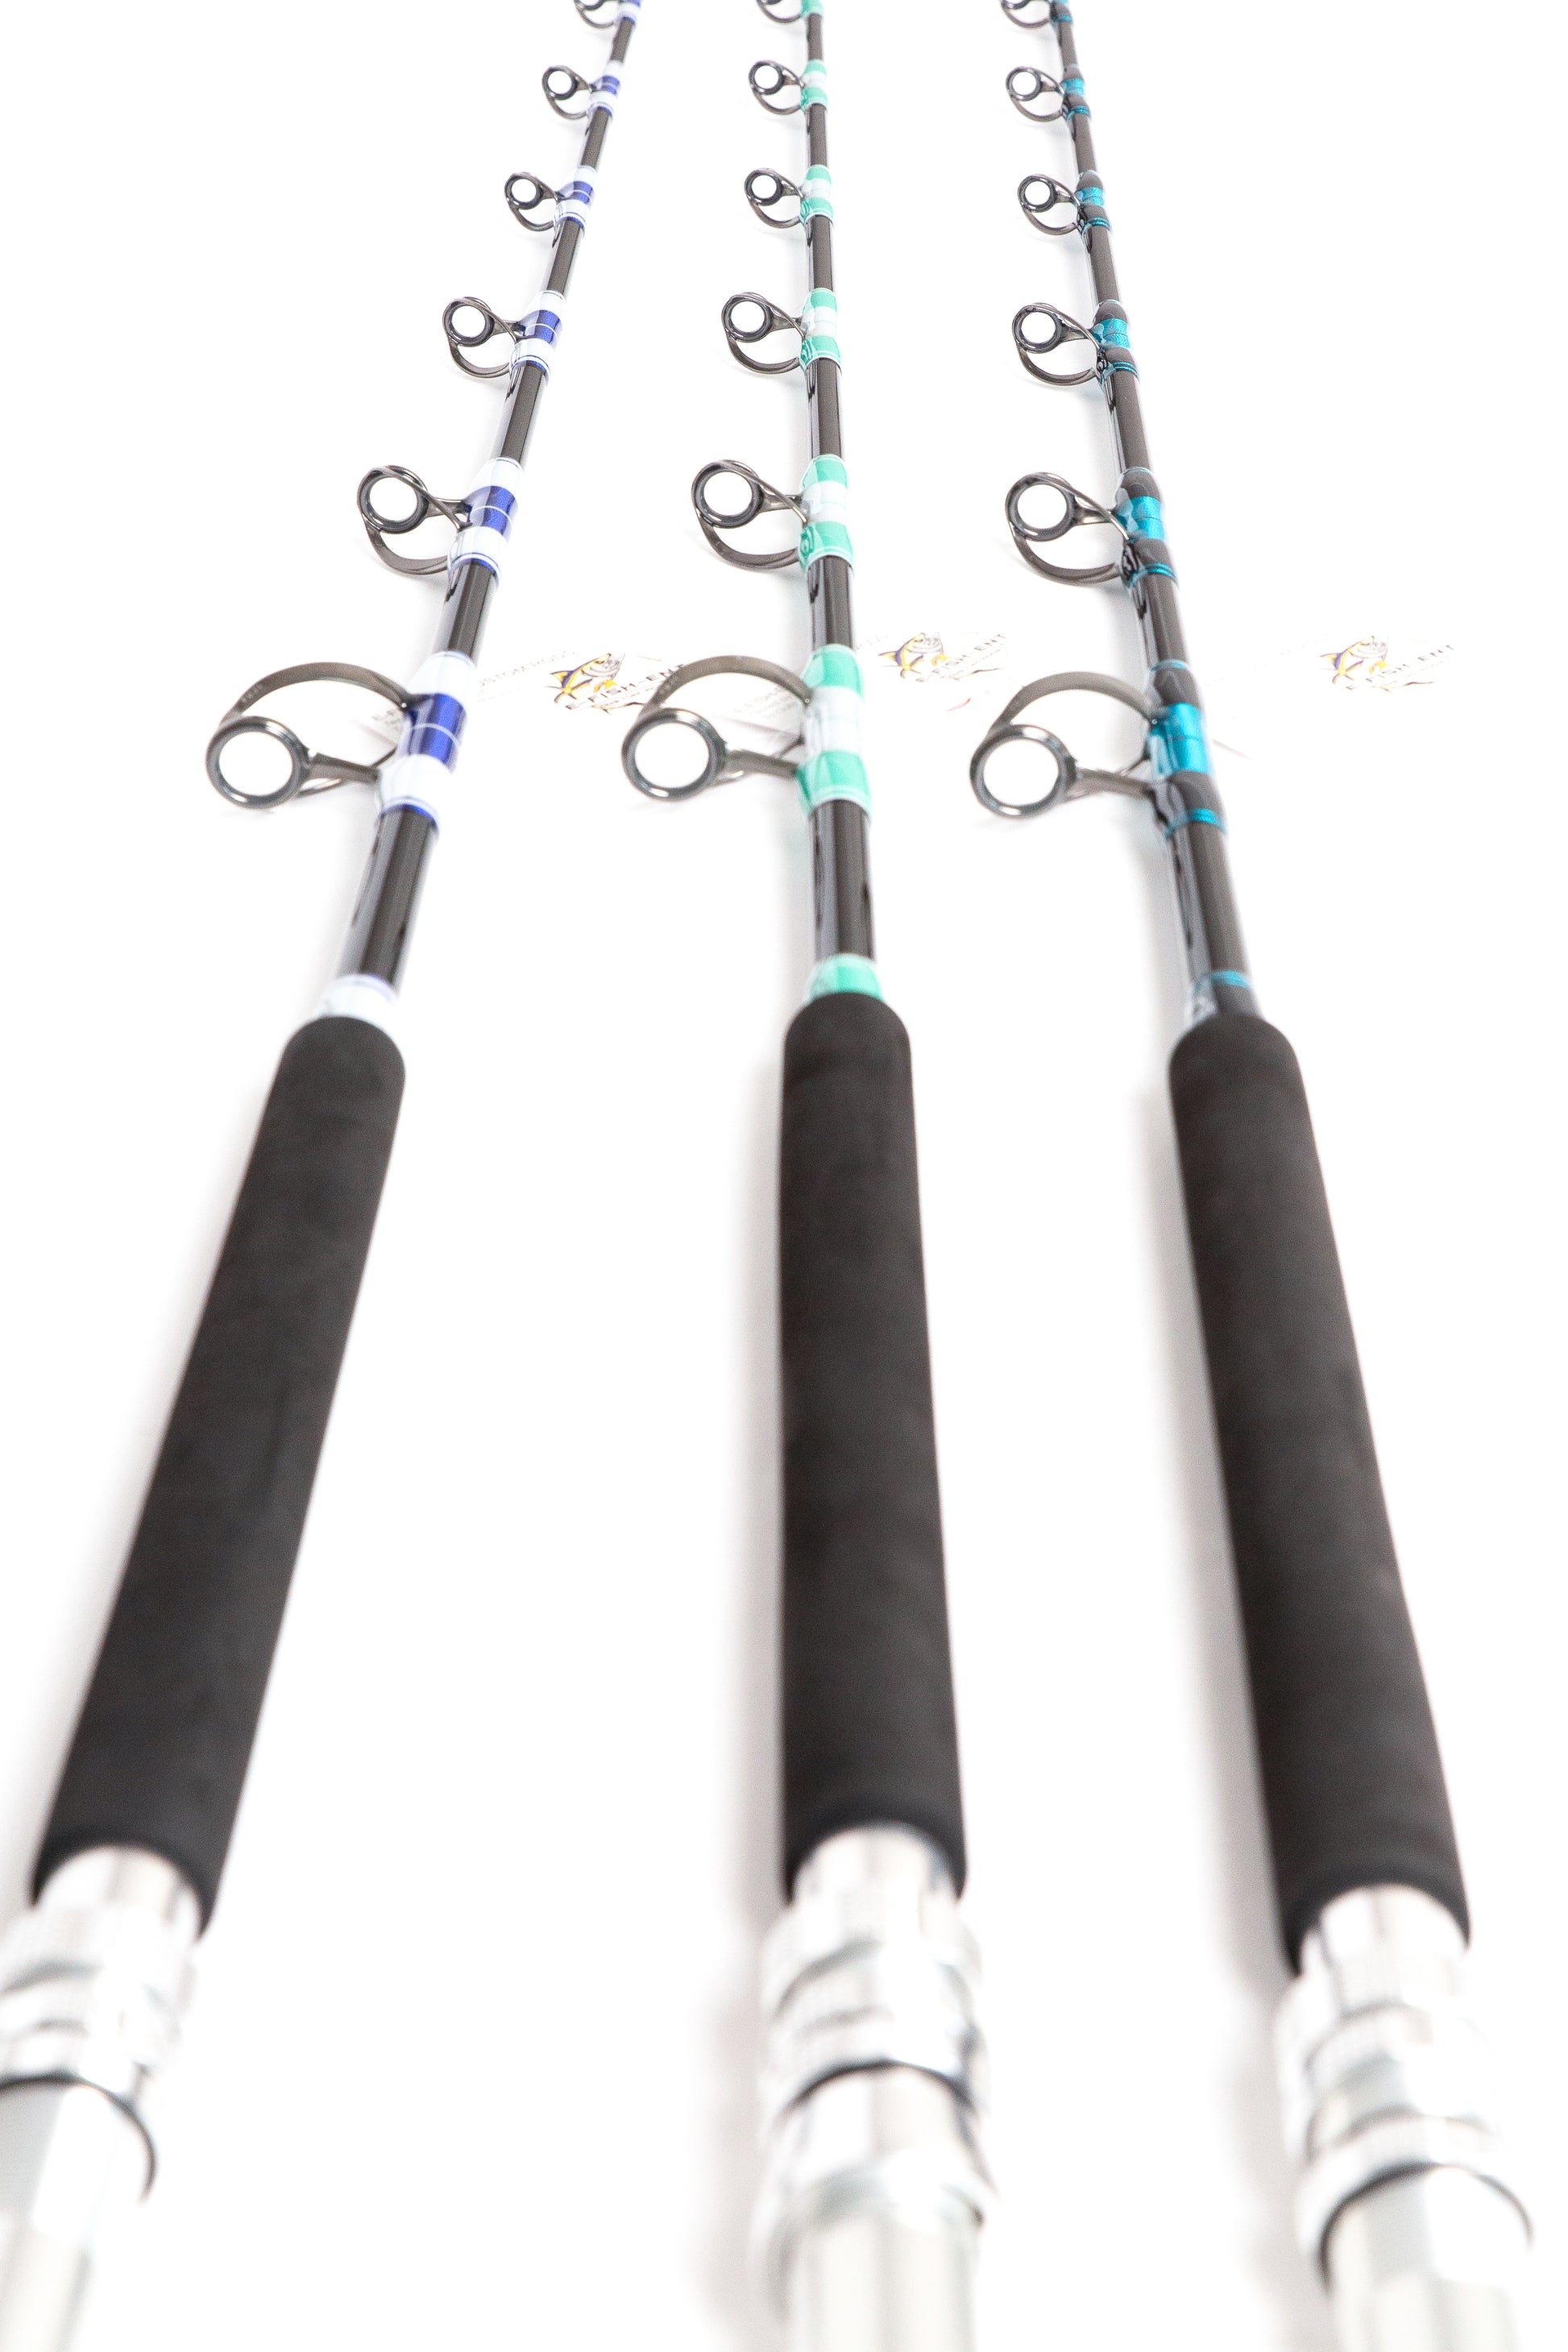 Offshore Trolling Series – E-Fish-Ent Custom Rods